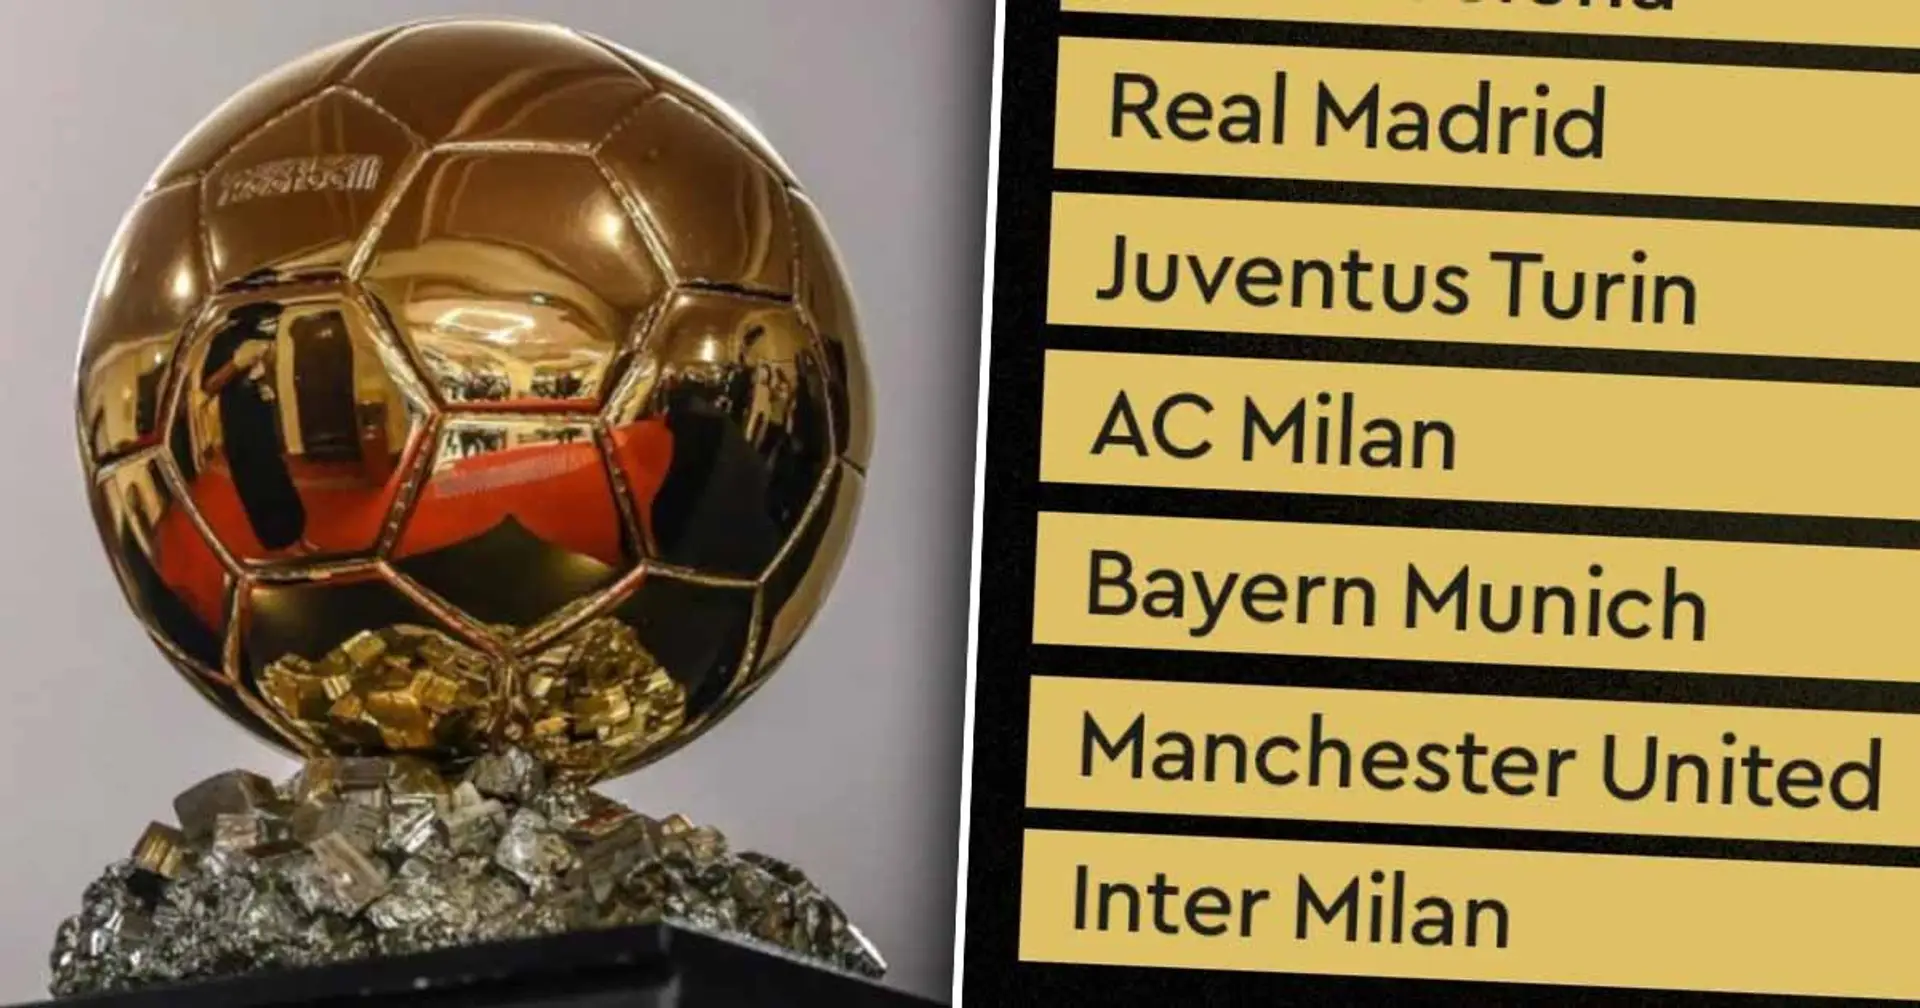 Where Barcelona stand among top Ballon d'Or winners by club